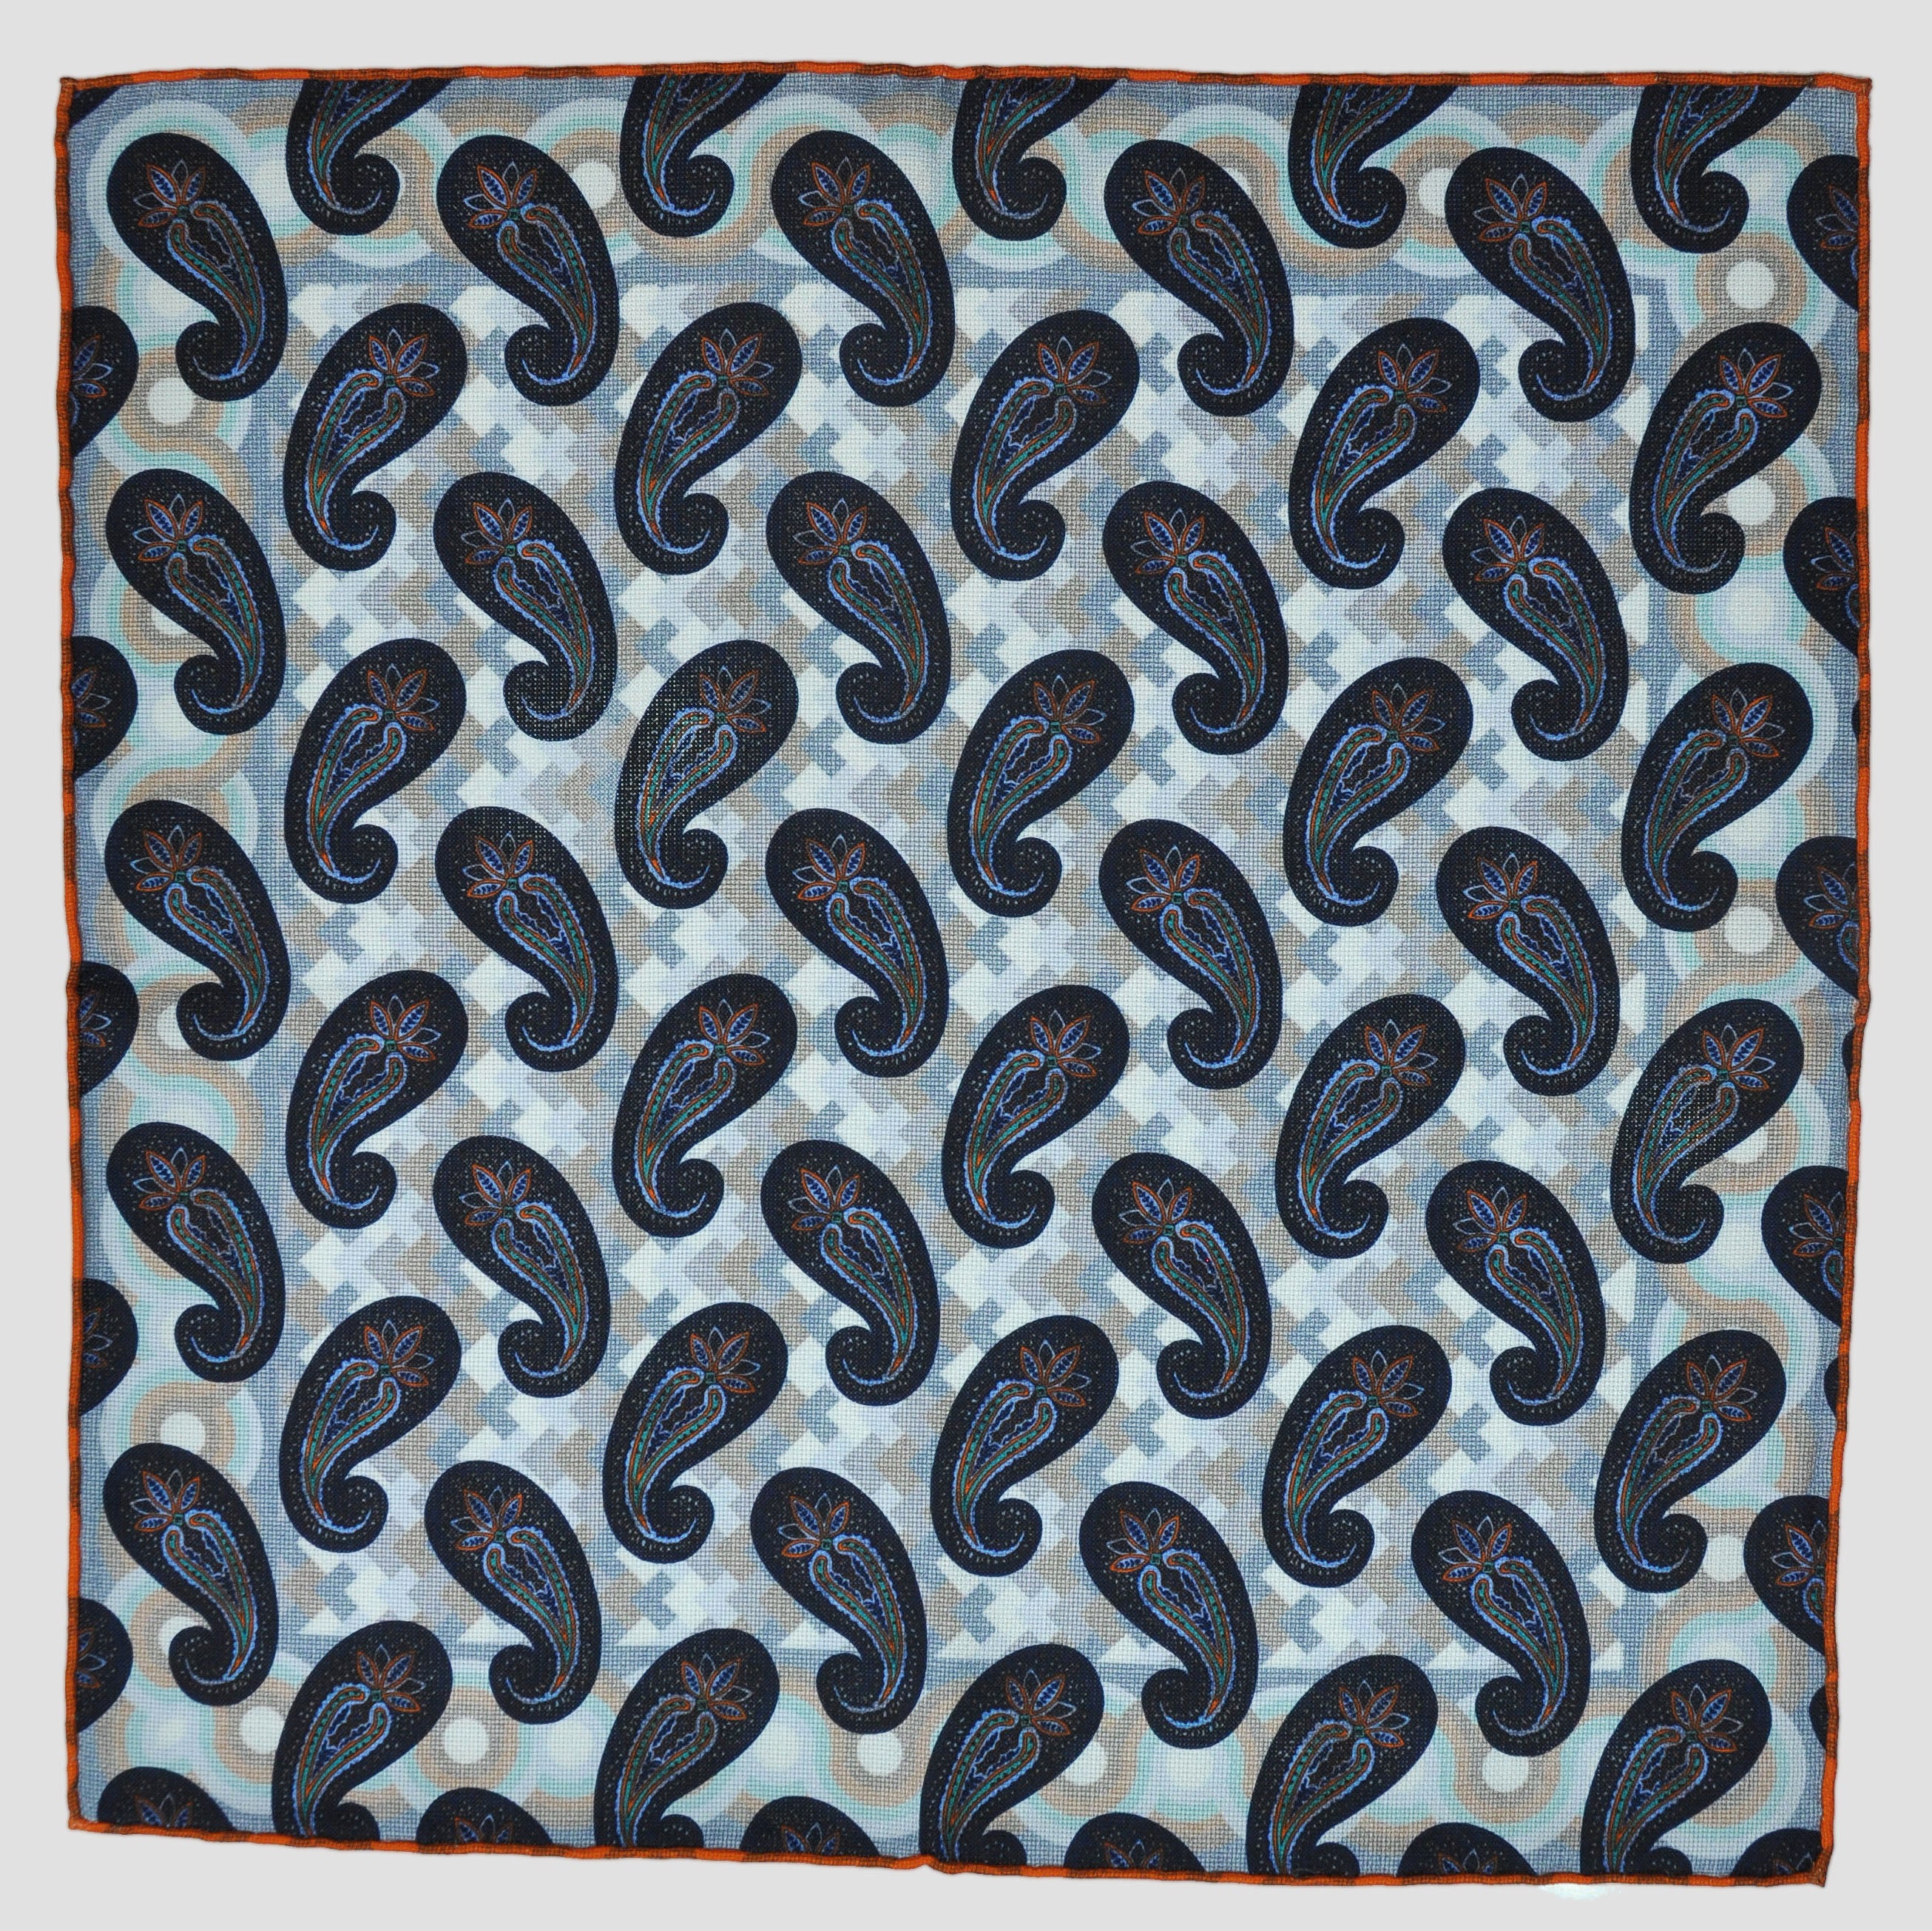 Deco & Tears Reversible Panama Silk Pocket Square in Blues & Browns